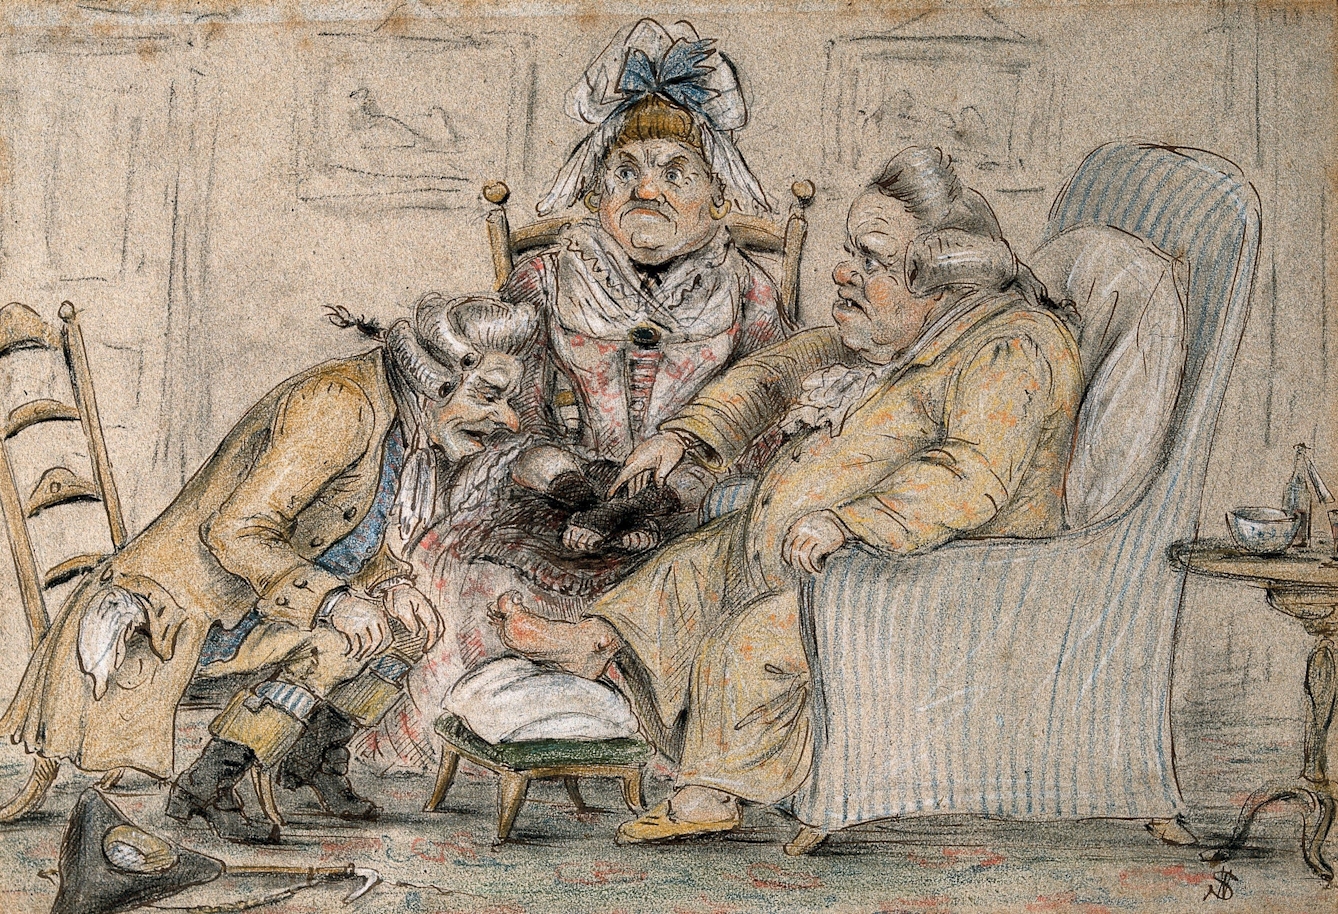 Painting showing two seated men and one seated woman. One of the men is in an armchair with a bare foot resting on a cushion on a stool. The other man is leaning over to examine the foot, which appears red and swollen.